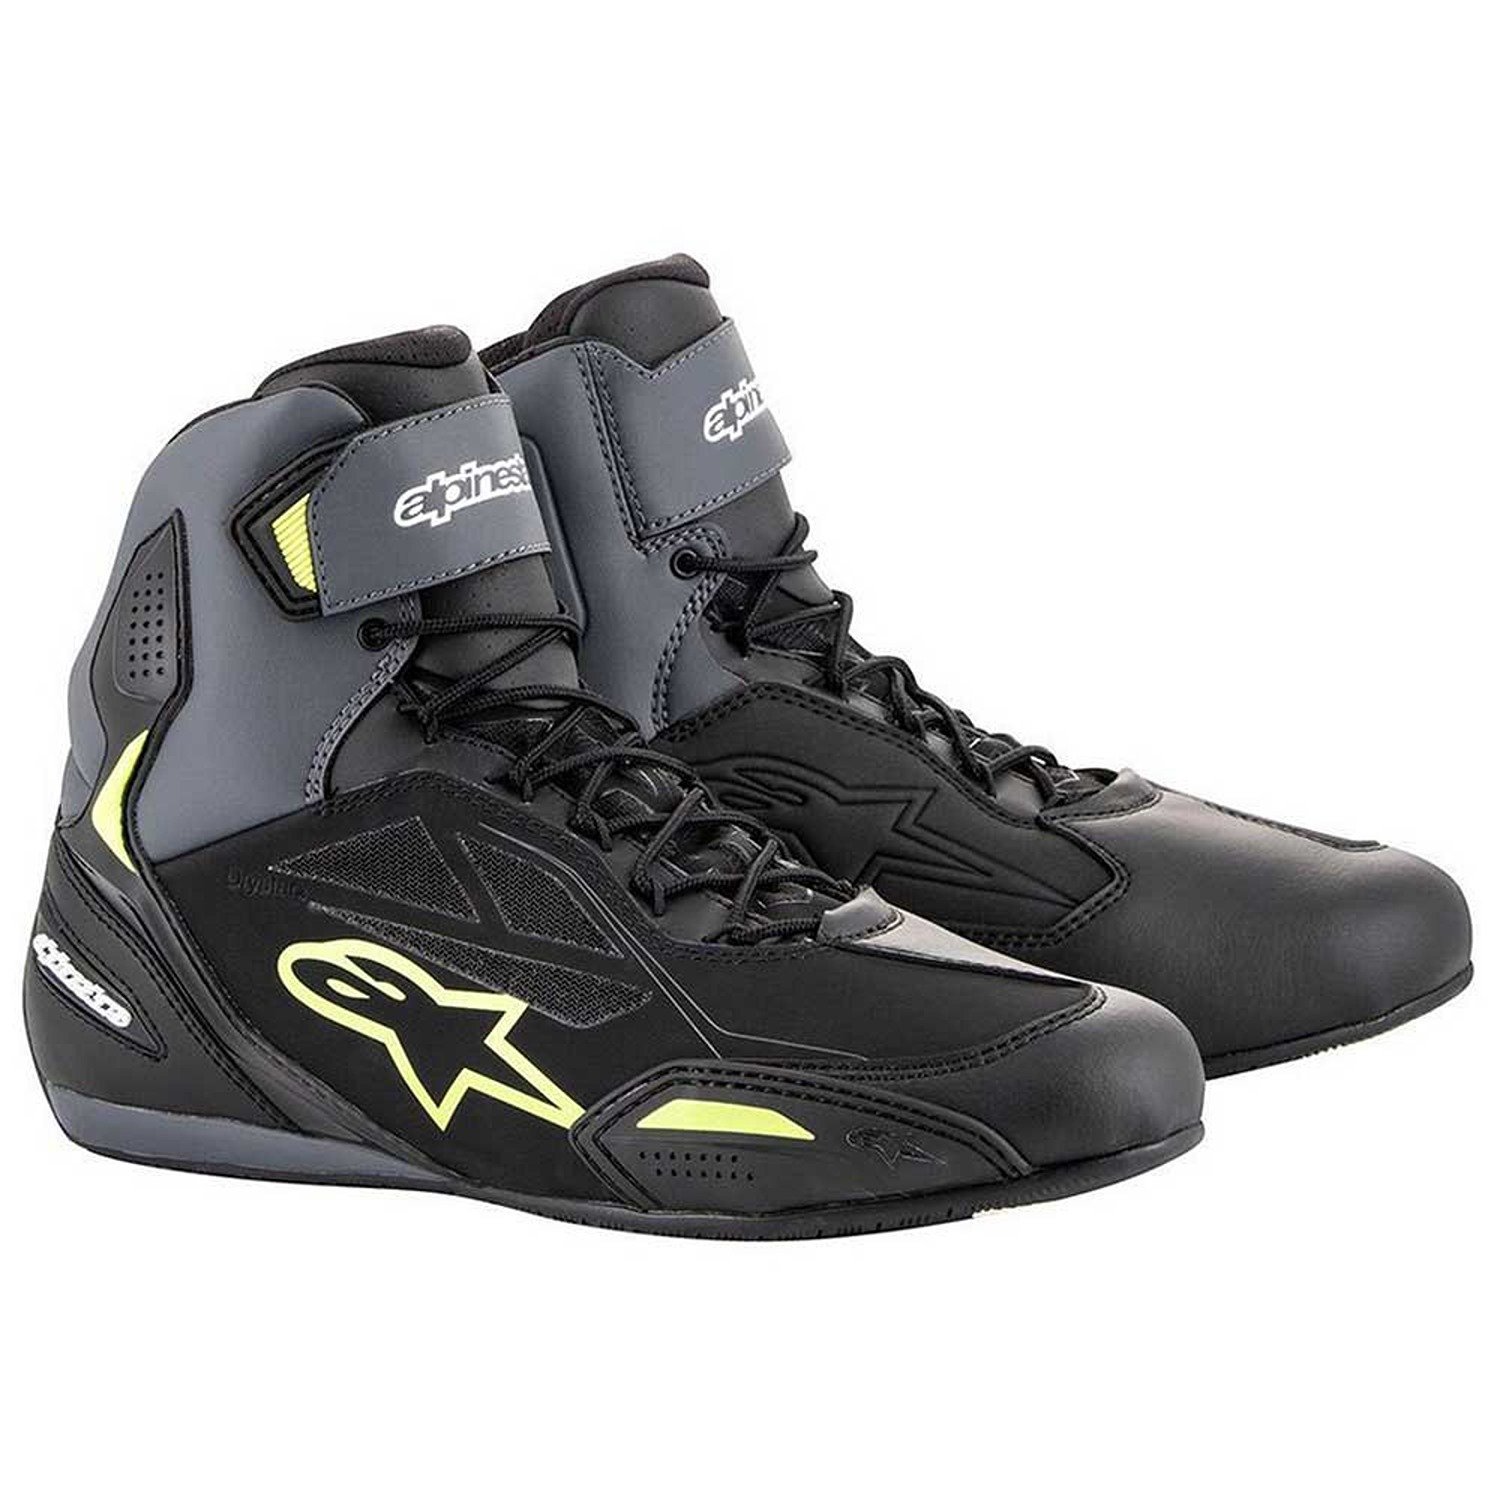 Image of Alpinestars Faster-3 Shoes Black Yellow Fluo Talla US 135